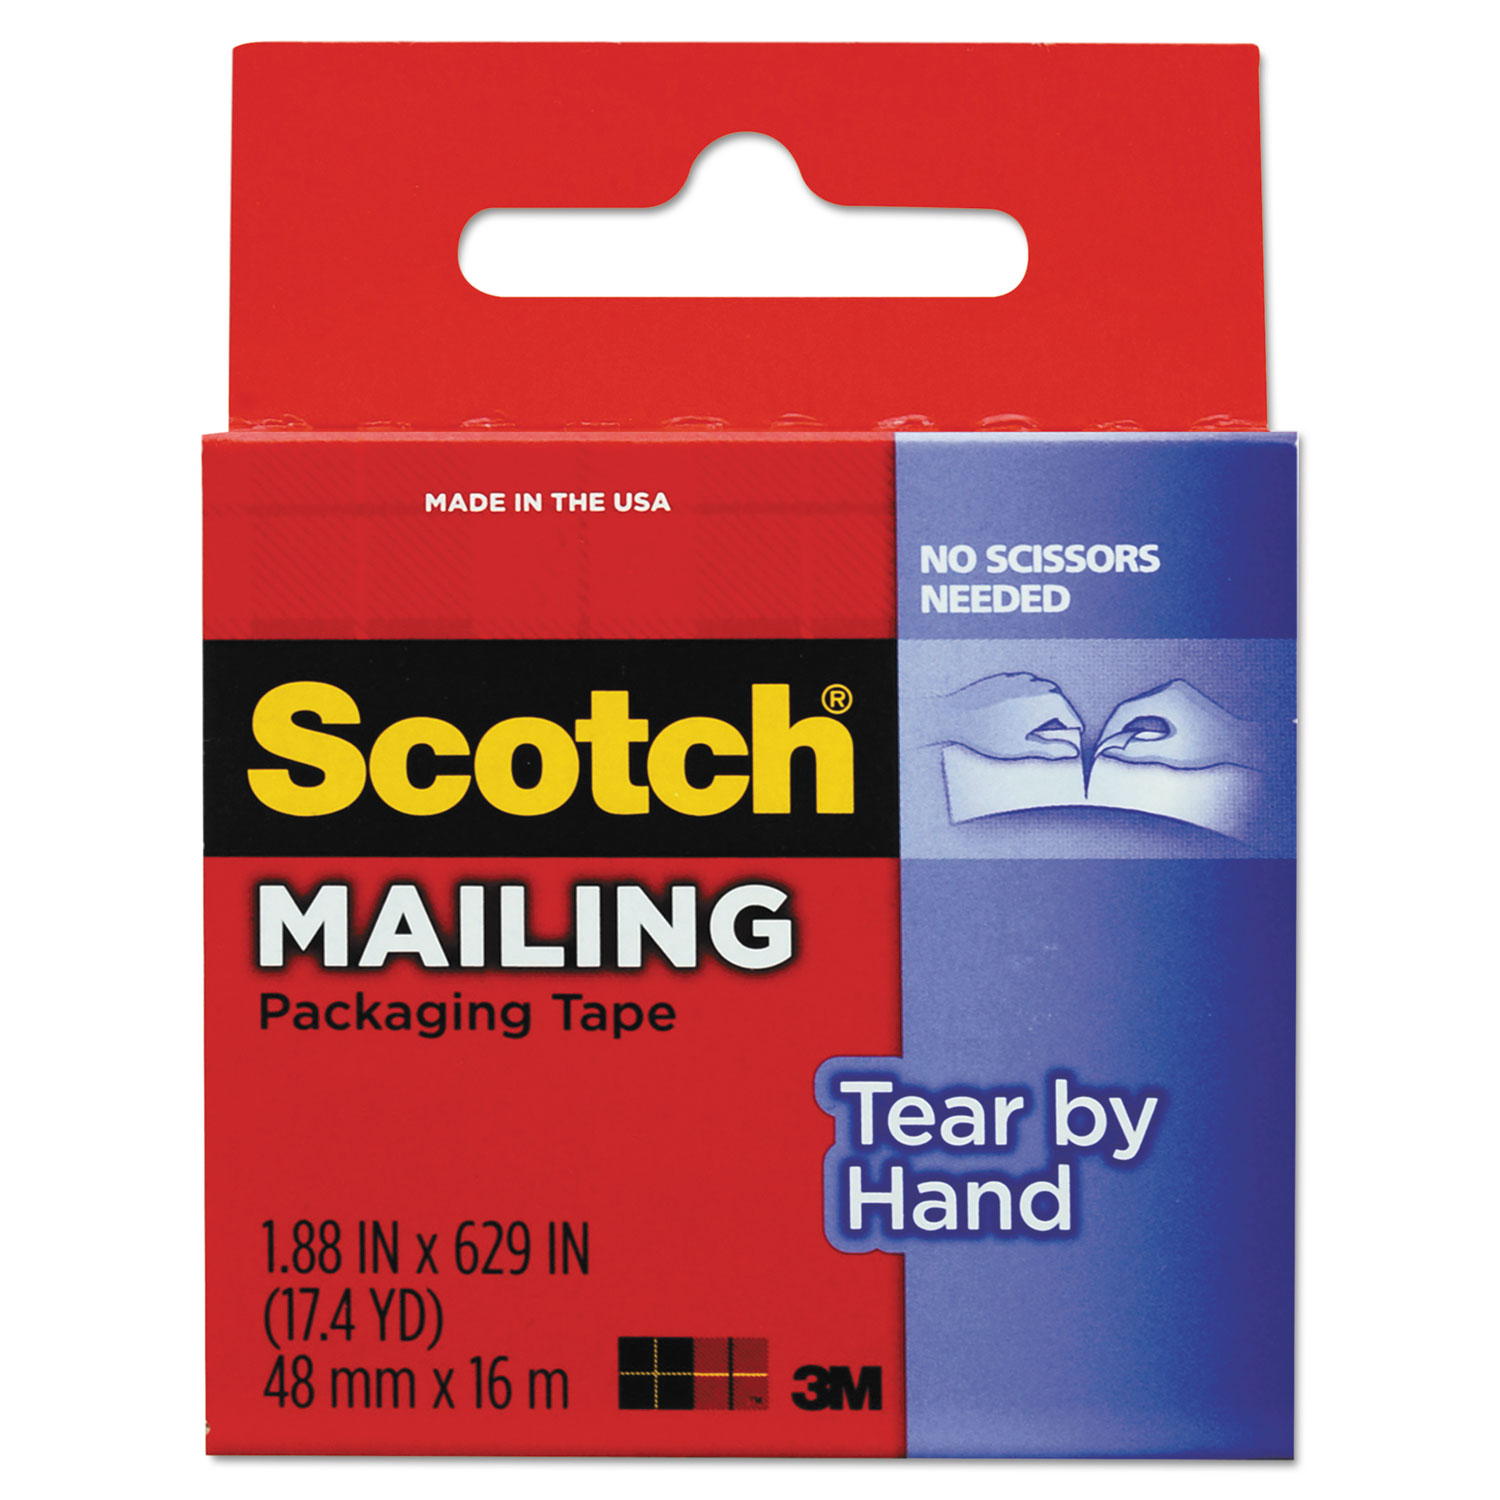  Scotch 3841 Tear-By-Hand Packaging Tapes, 1.5 Core, 1.88 x 17.5 yds, Clear (MMM3841) 